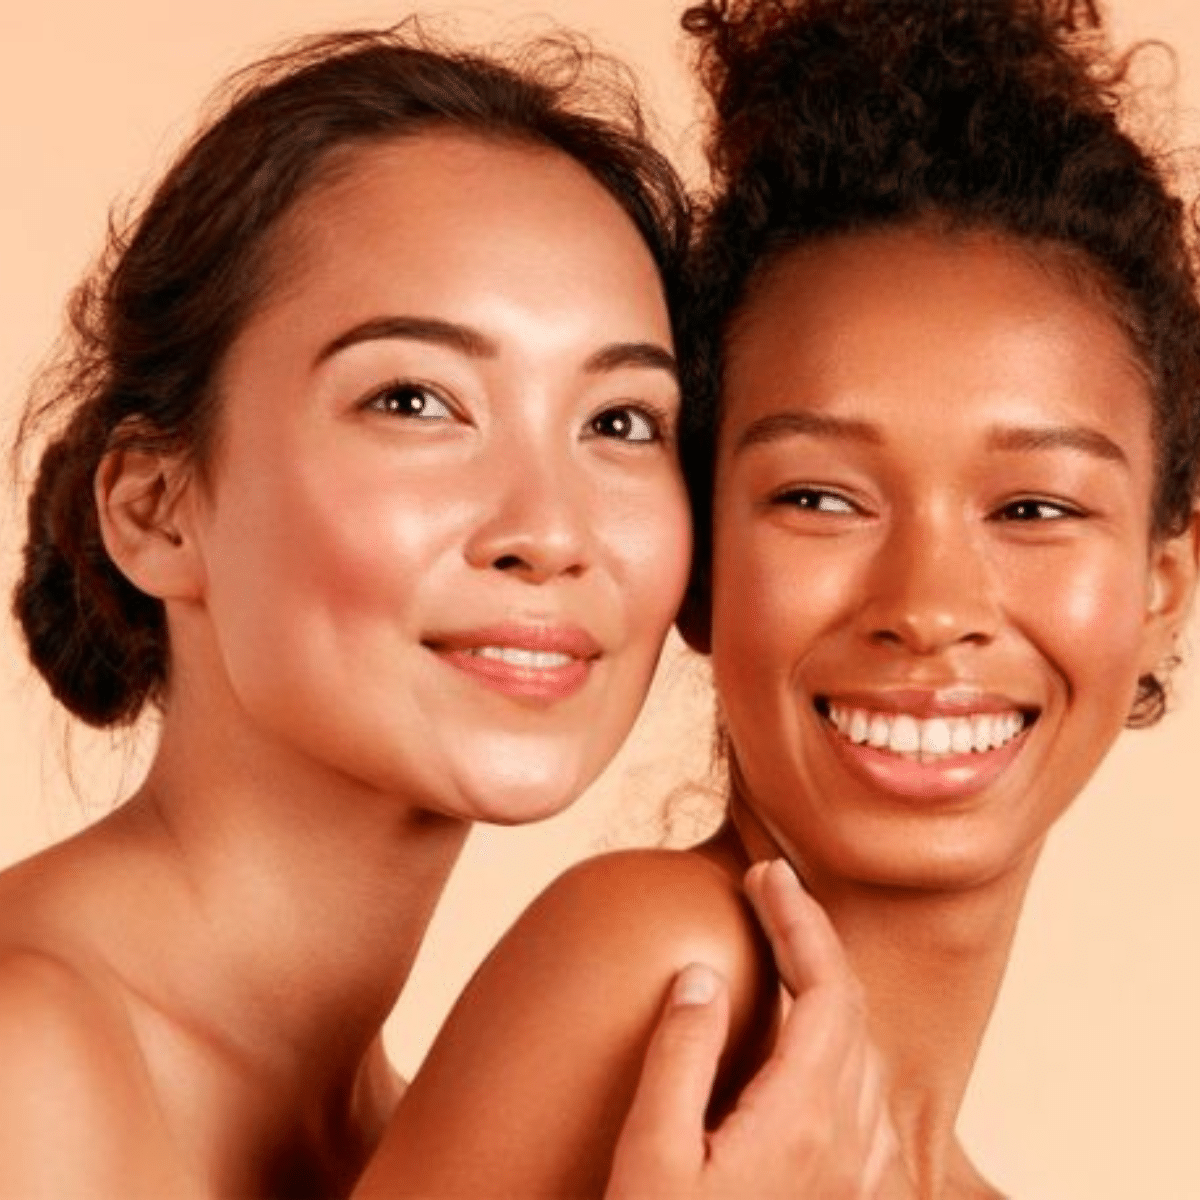 Two smiling women with amazing skin